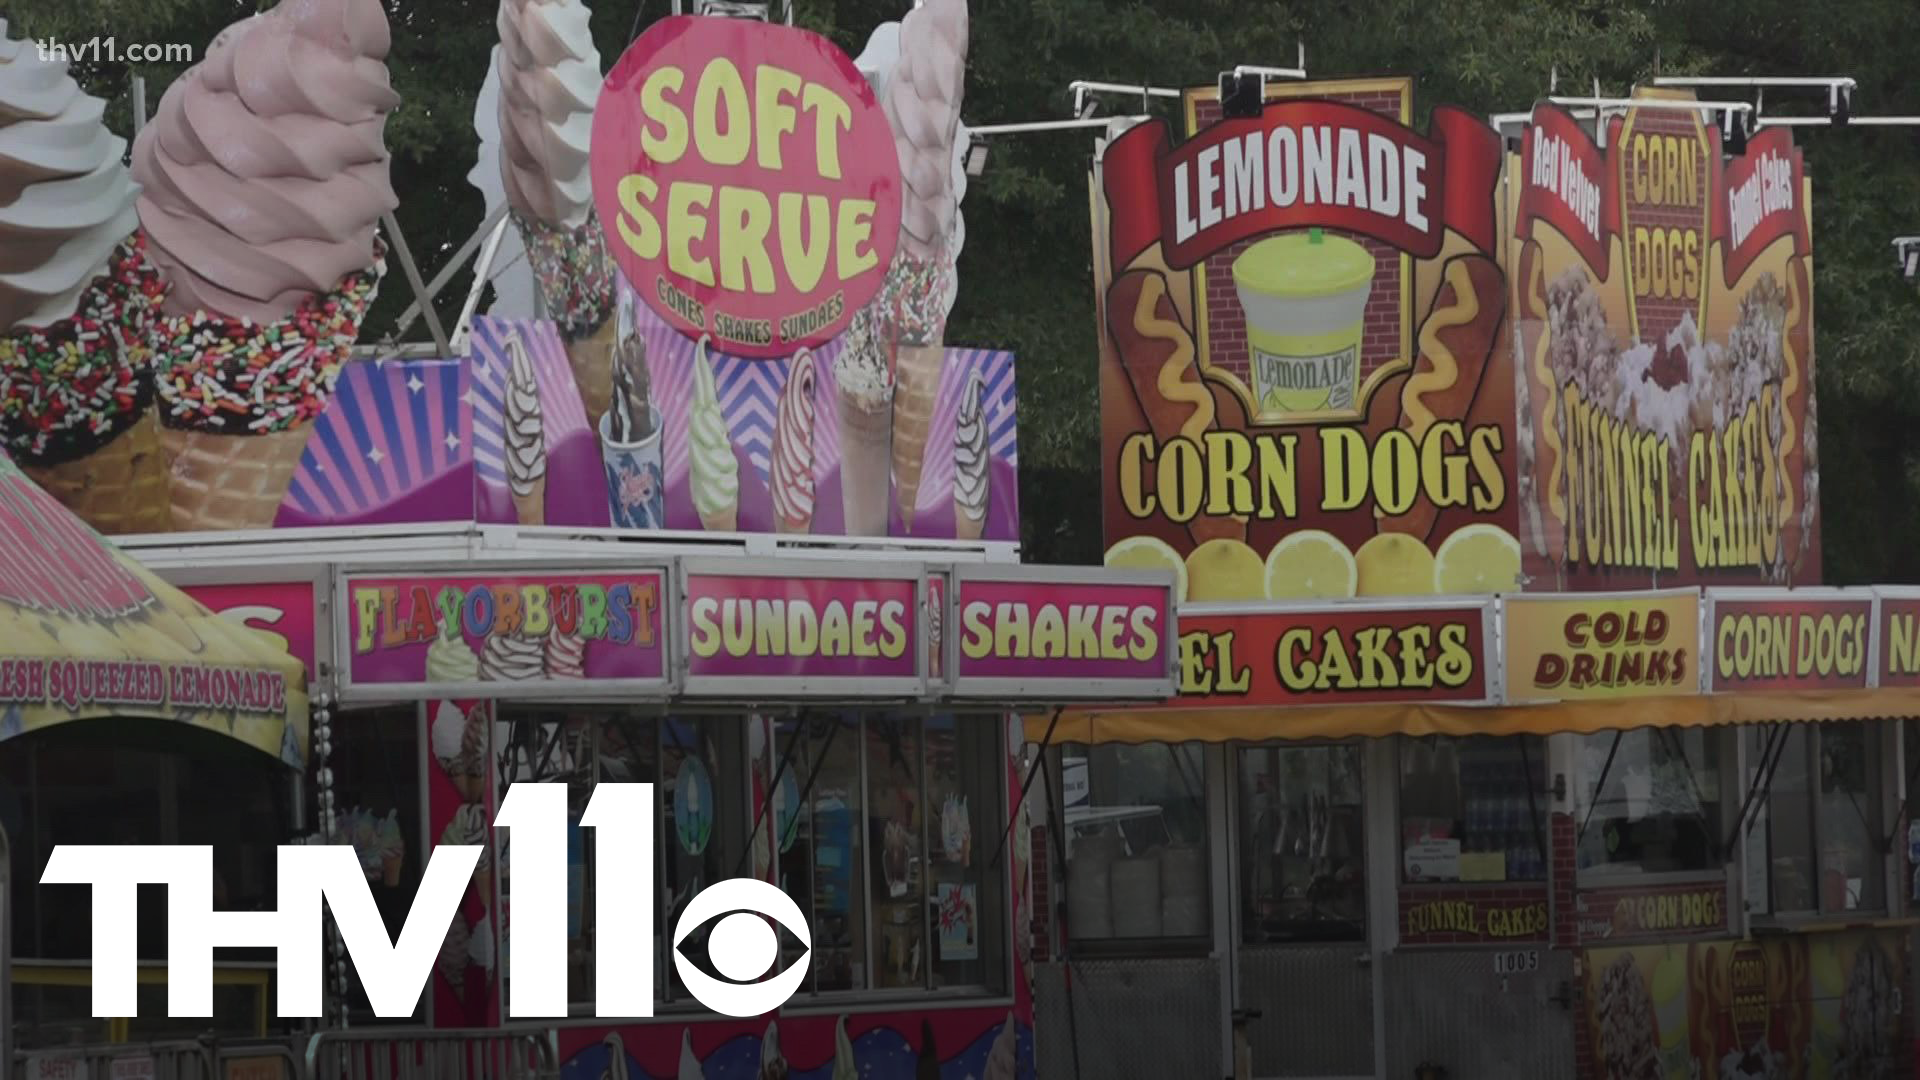 After a brief hiatus last year because of the pandemic, the Arkansas State Fair is back in full swing.